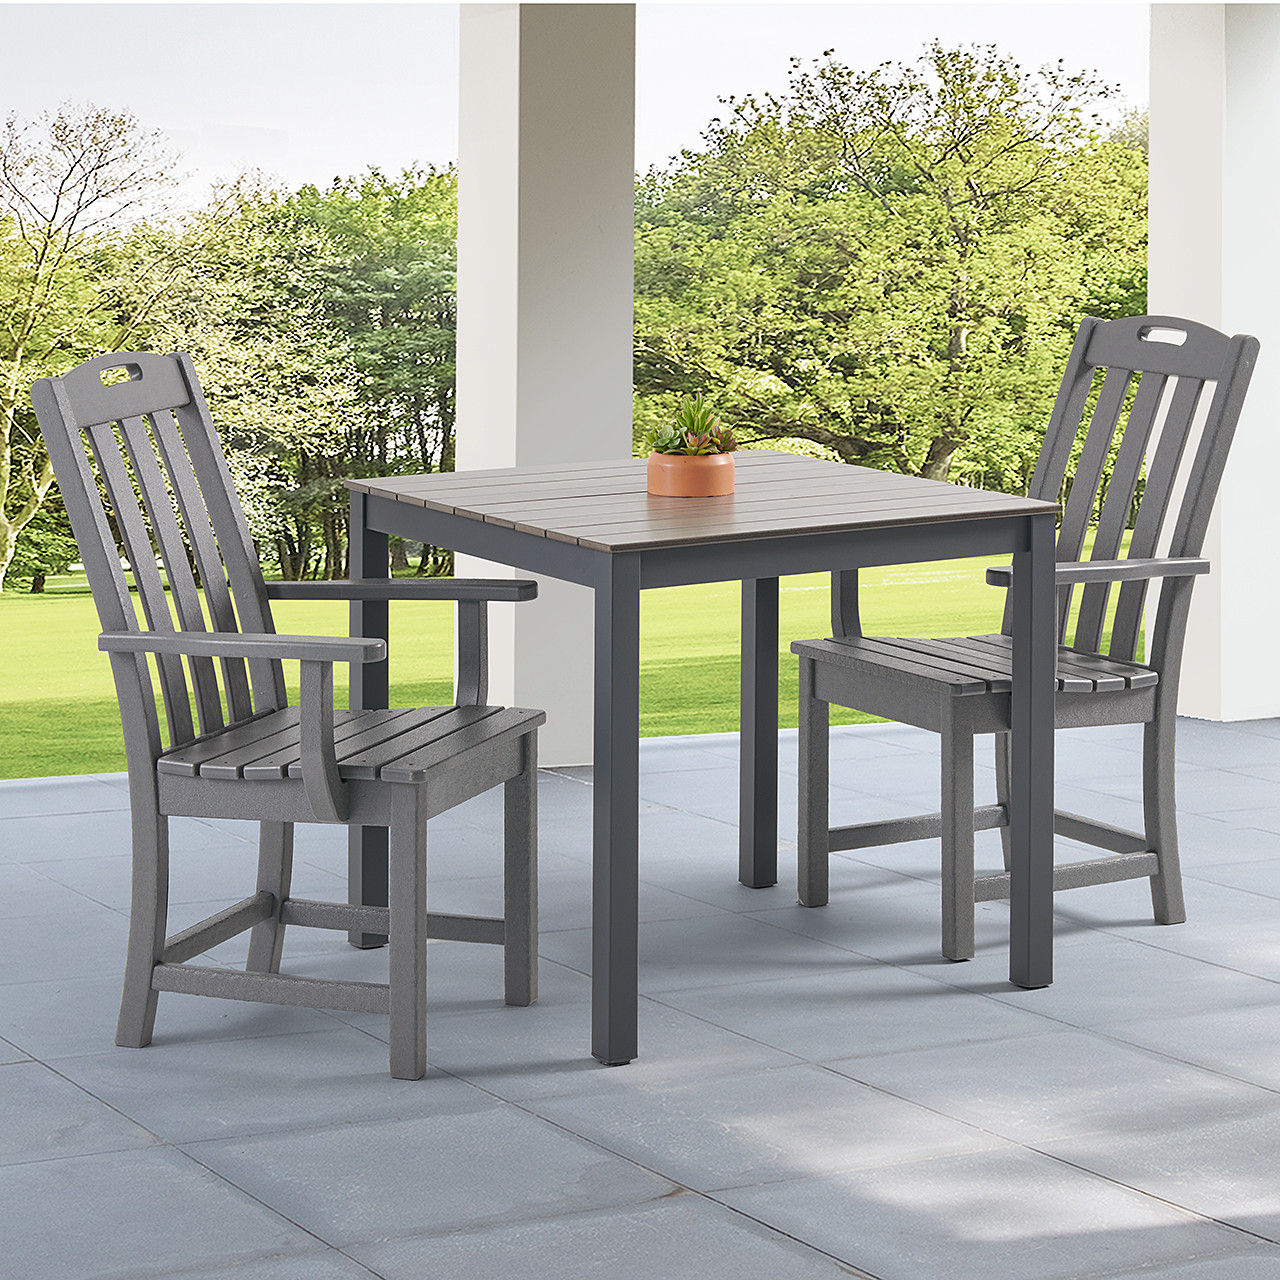 Surfside Slate Grey 3 Pc. Arm Bistro Set with 33 in. Sq Table